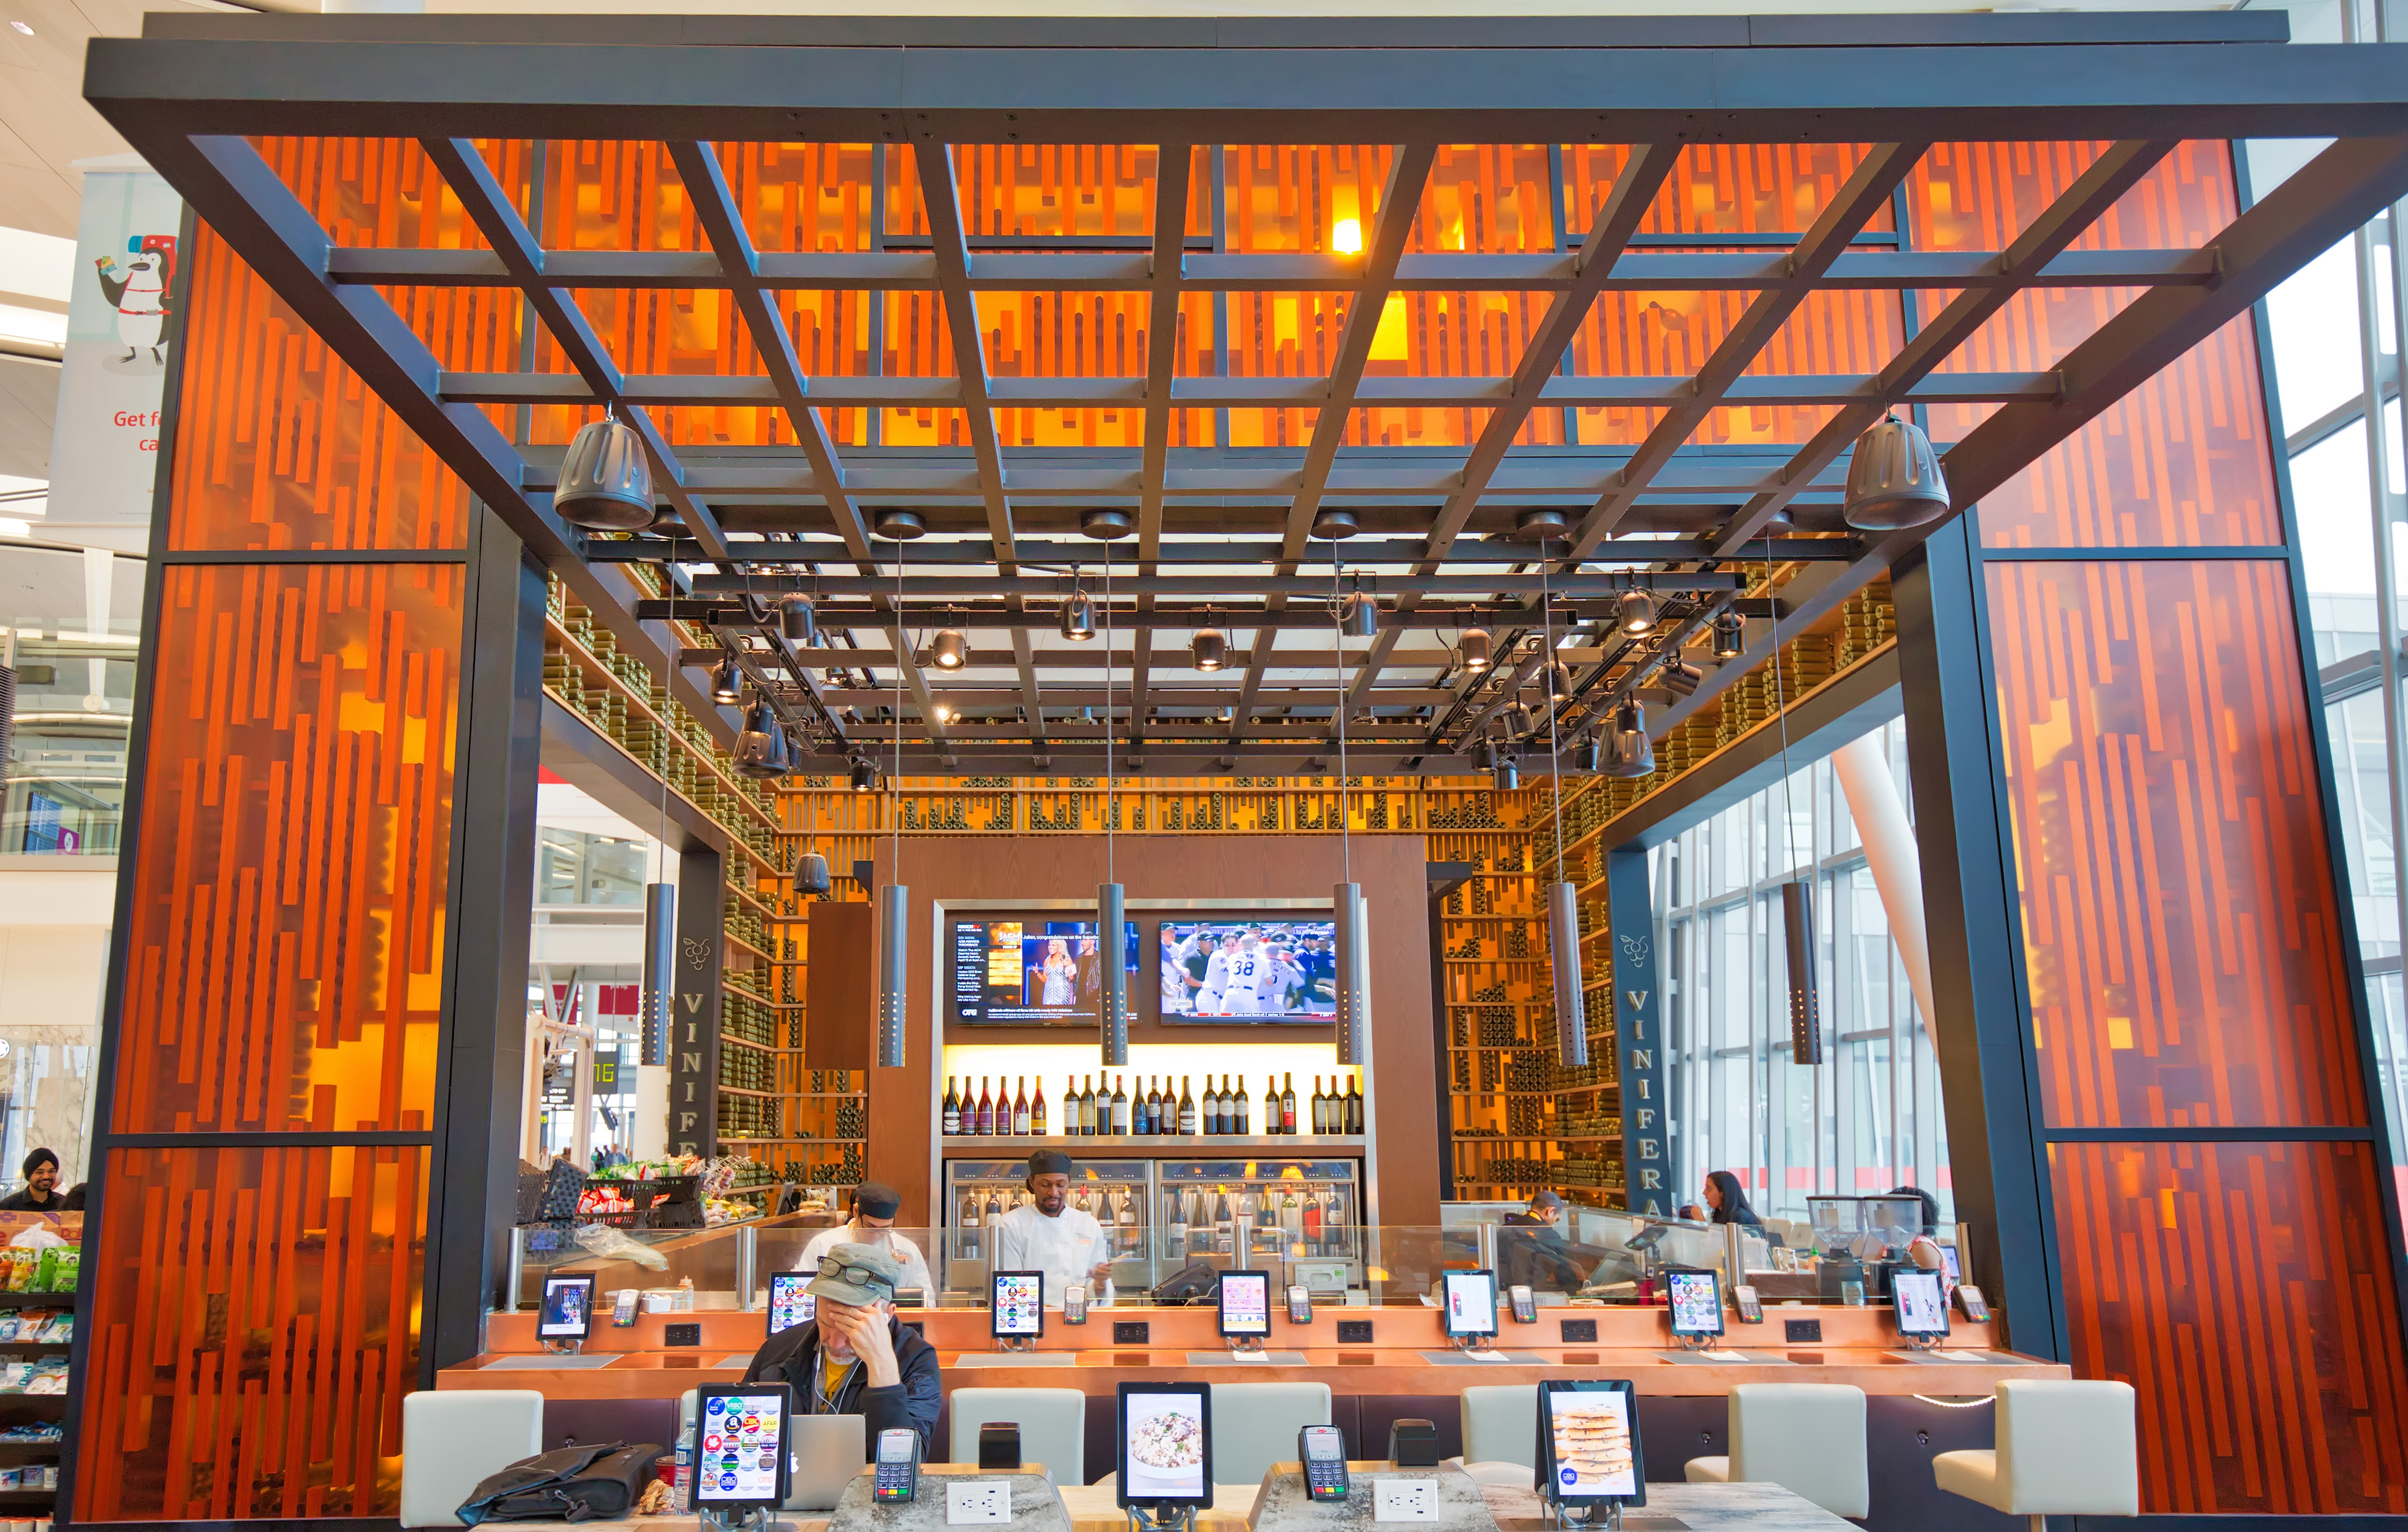 A large, open bar inside an airport hall. The restaurant is decorated with large orange panels. Customers sit at tables outfitted with tablets for ordering